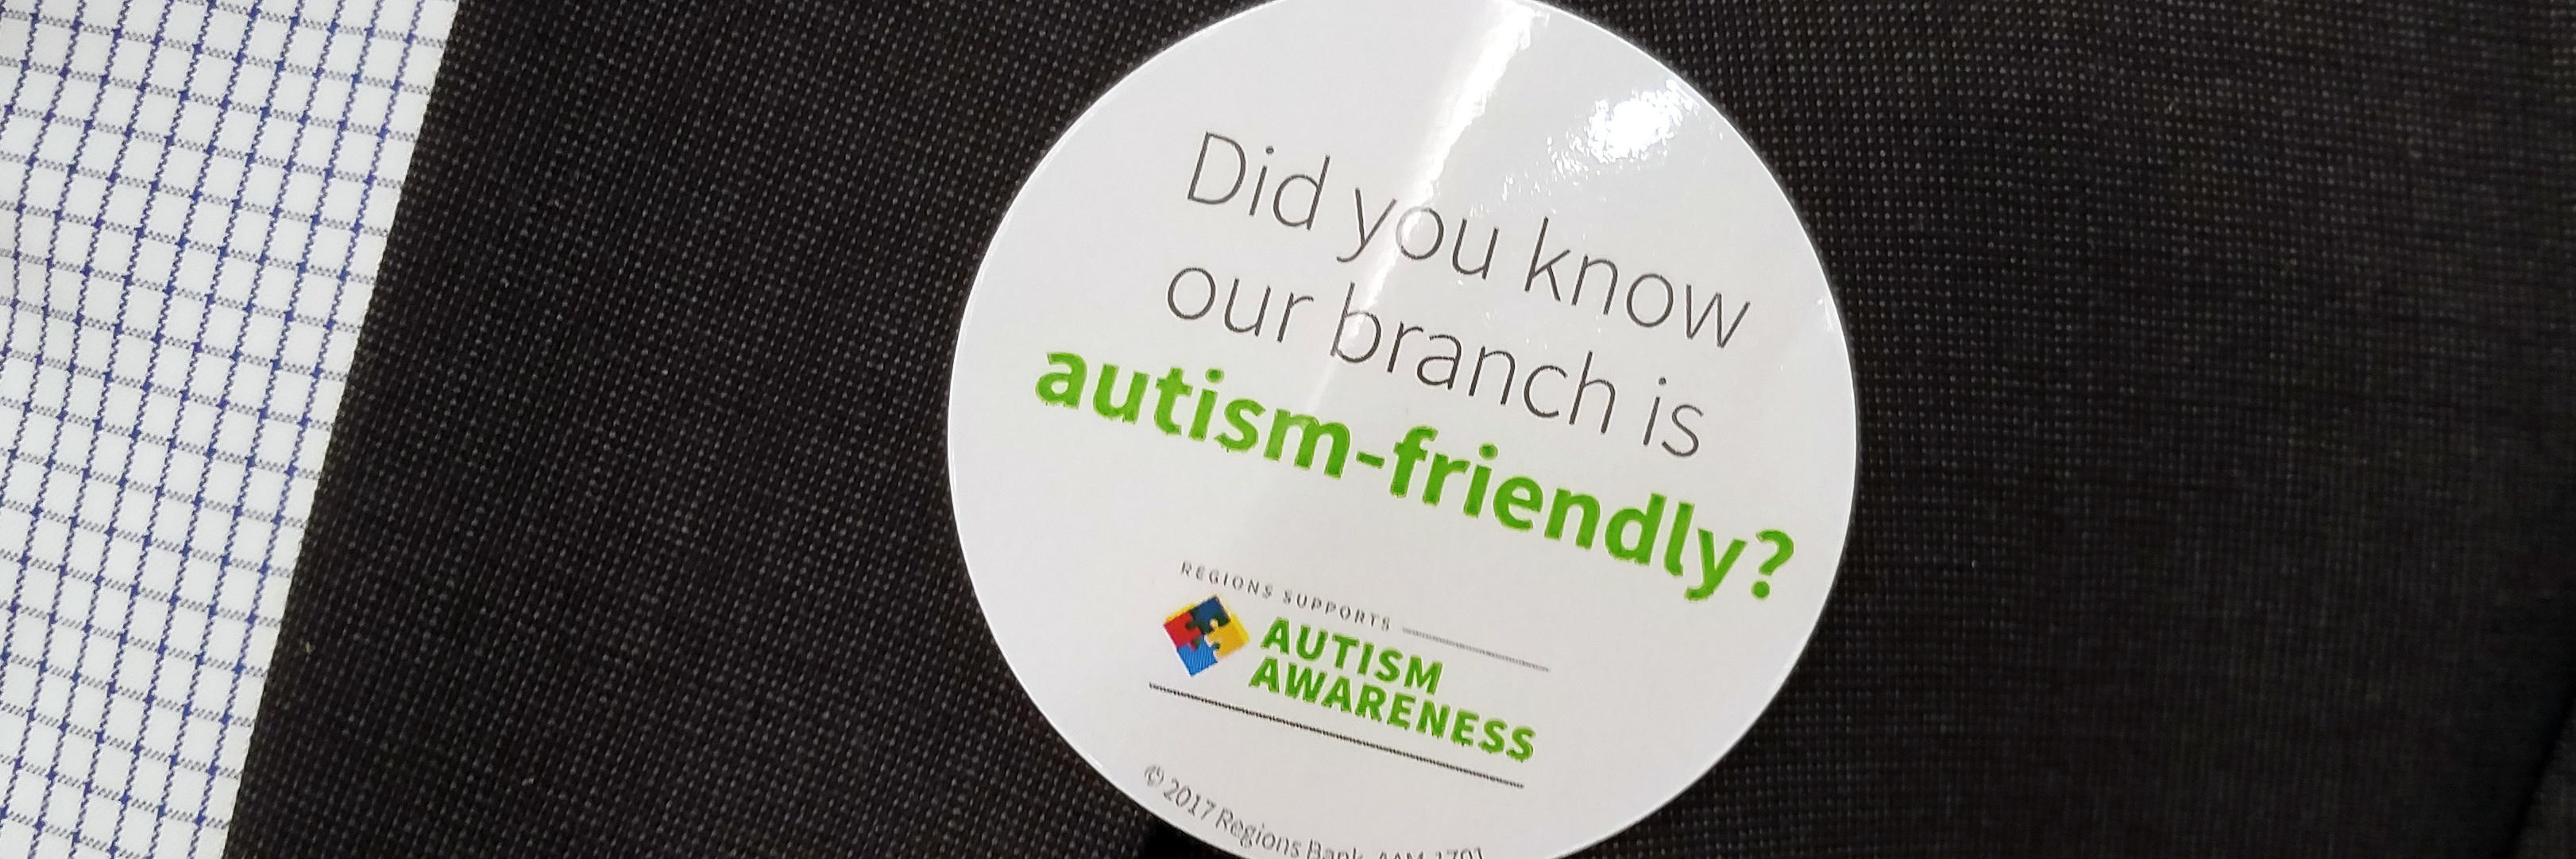 Sticker that says "Did you know our branch is autism-friendly?"